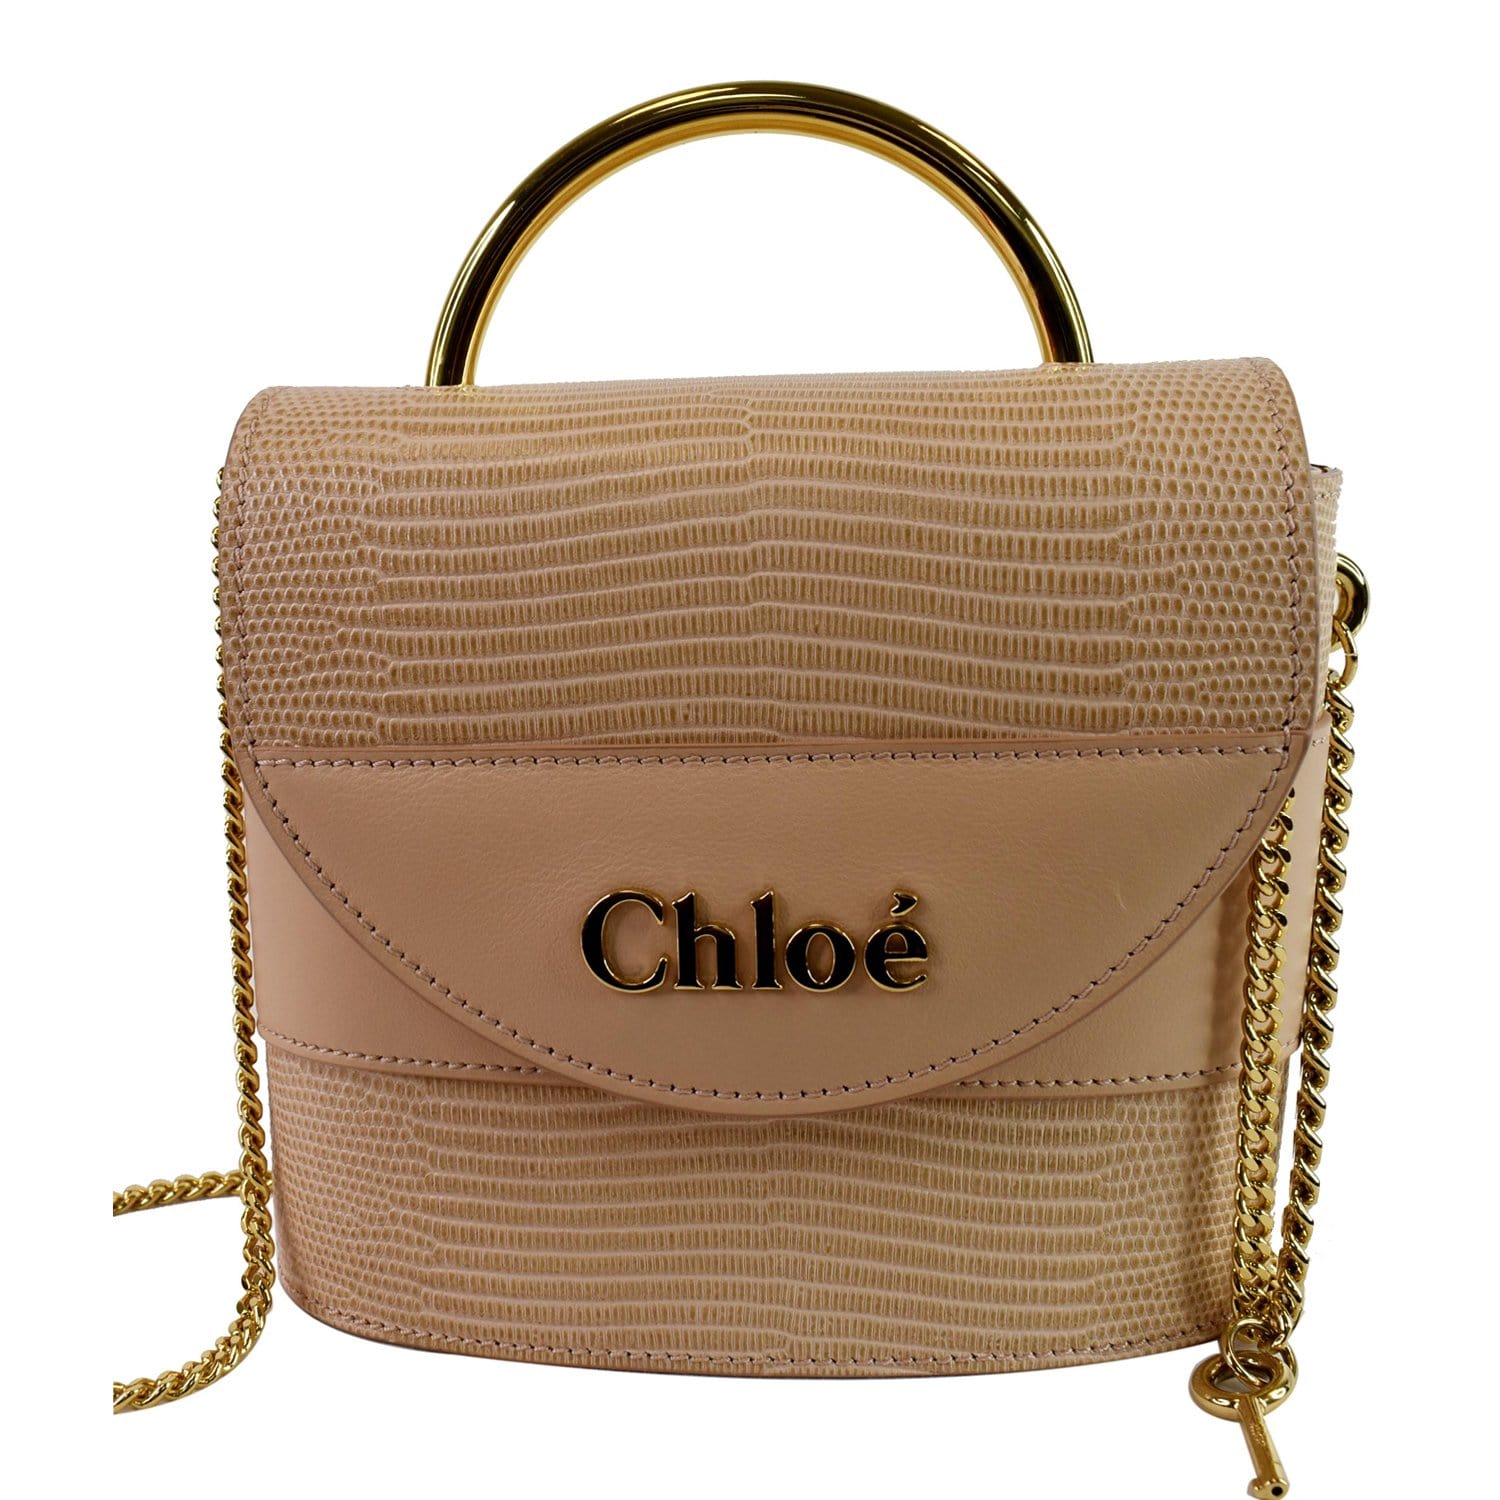 Chloe Pink Croc Embossed Leather Small C Double Carry Shoulder Bag Chloe